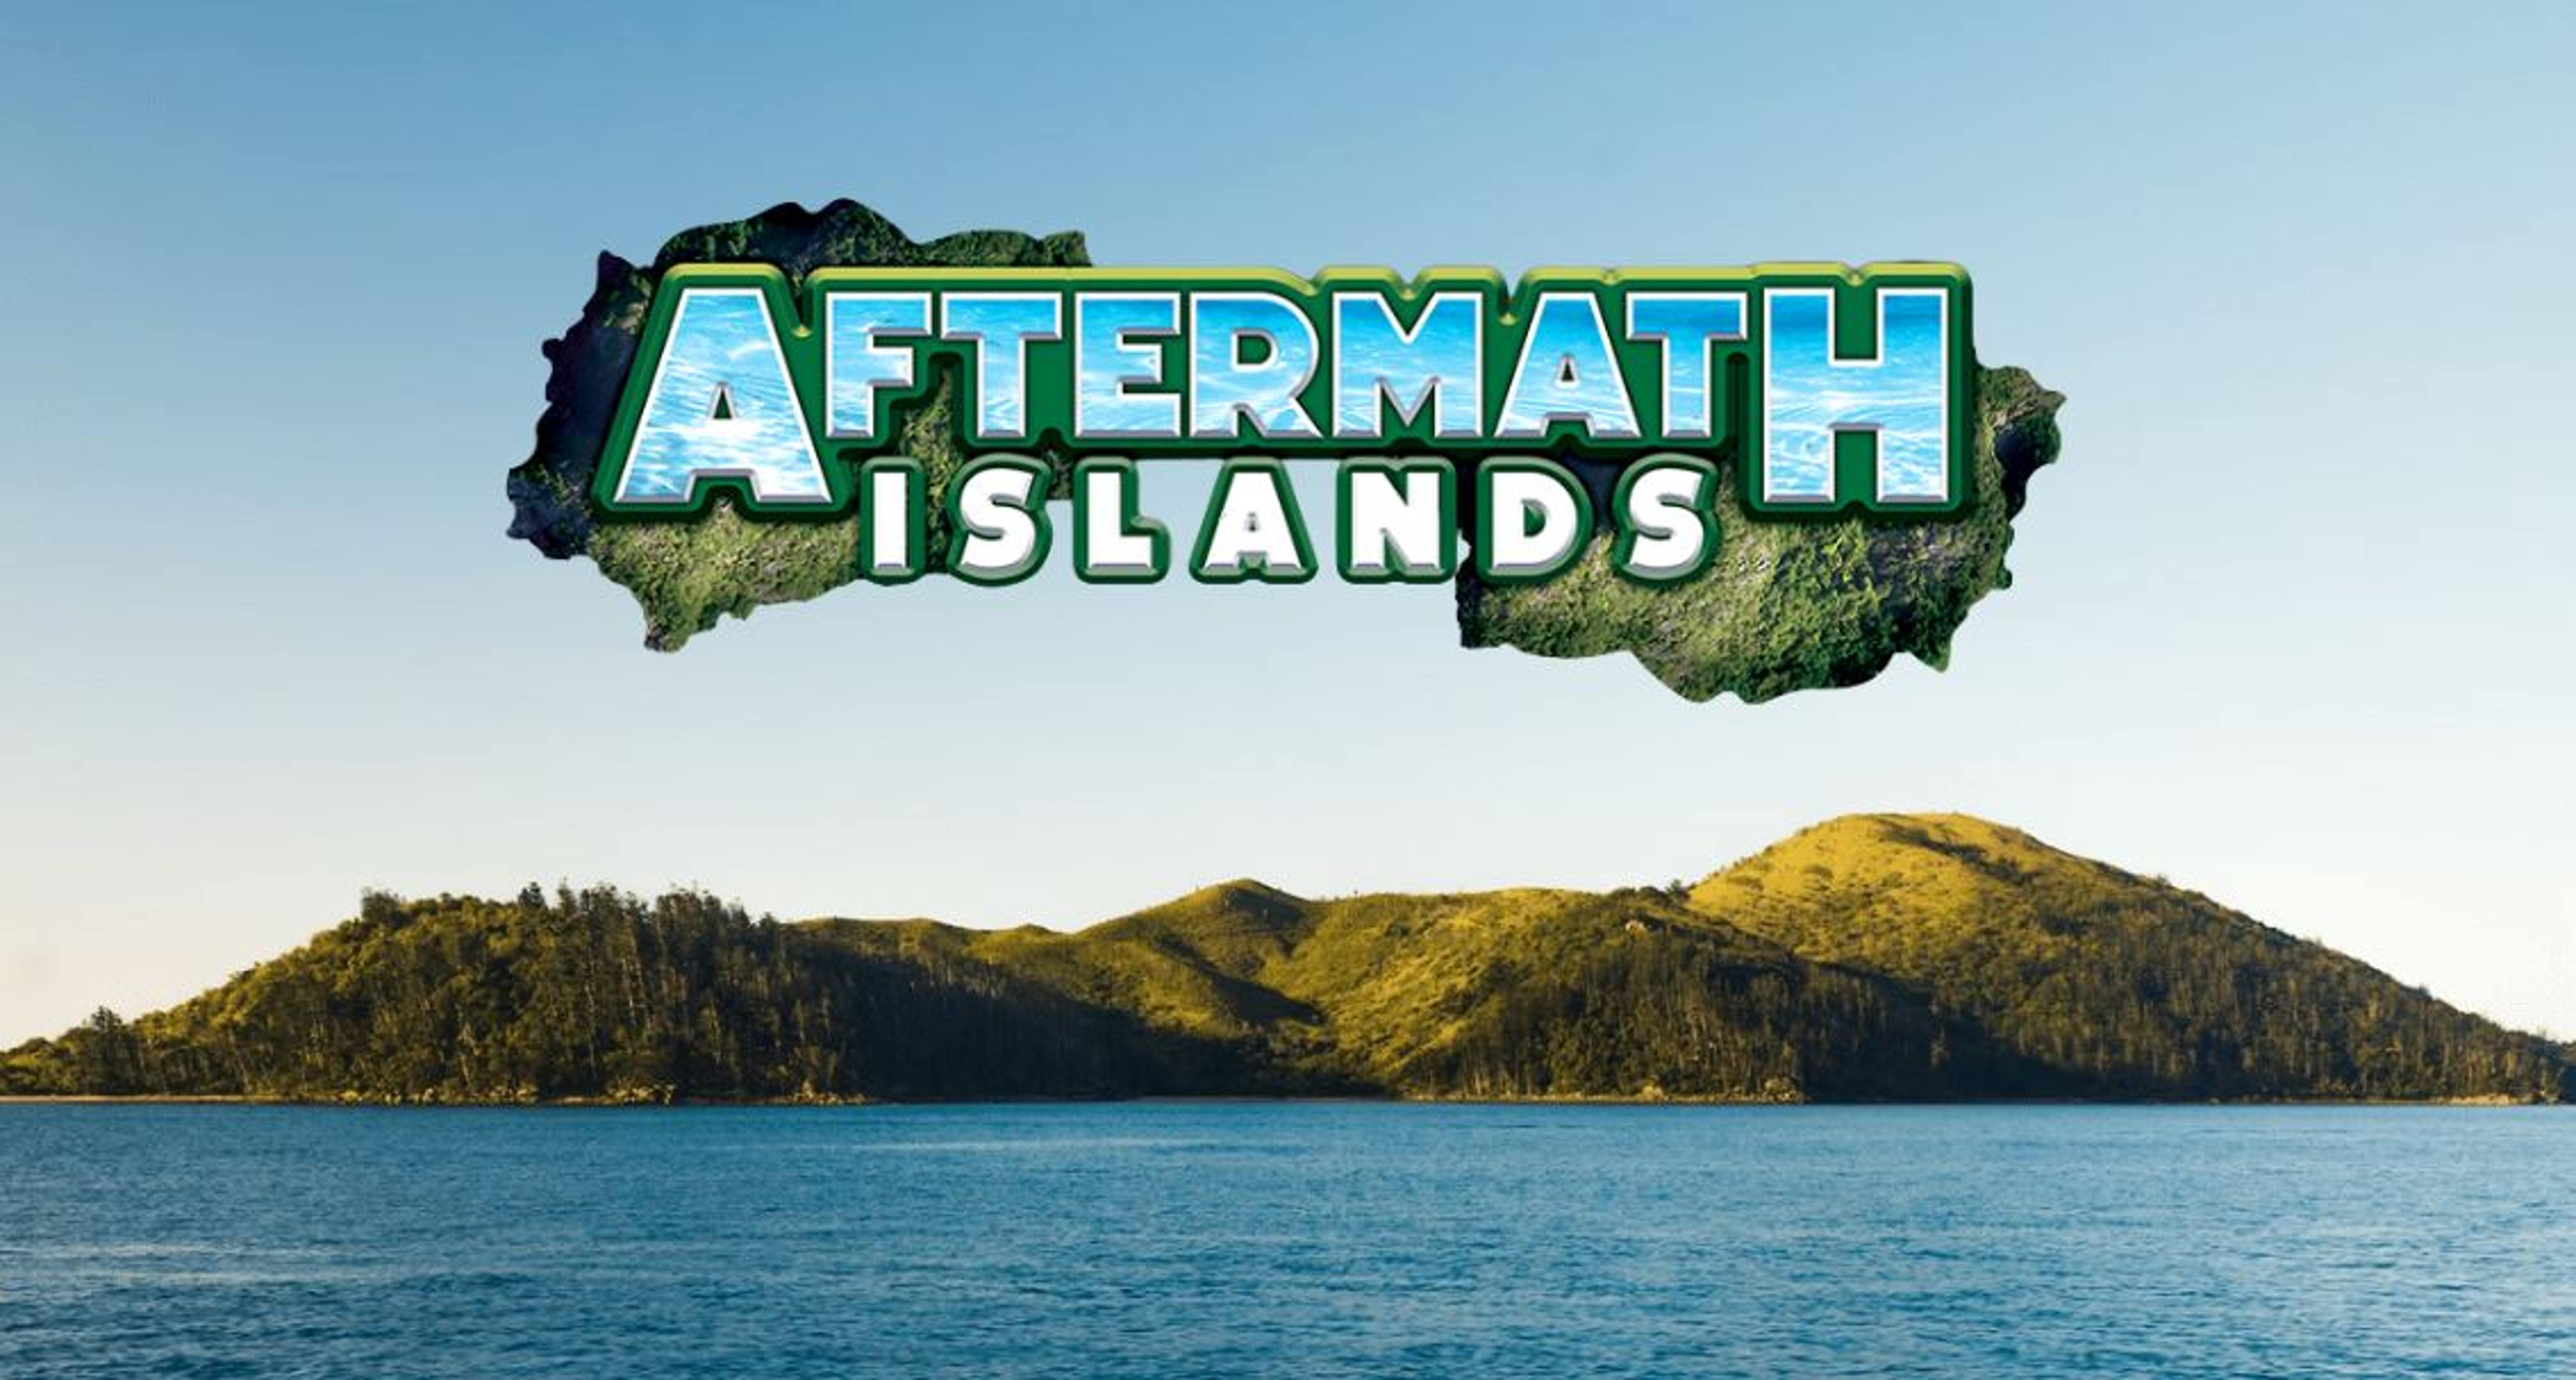 EXCLUSIVE: Aftermath Islands Boosts NFT, Gaming Asset Portfolios With Meta Hero Project Acquisition